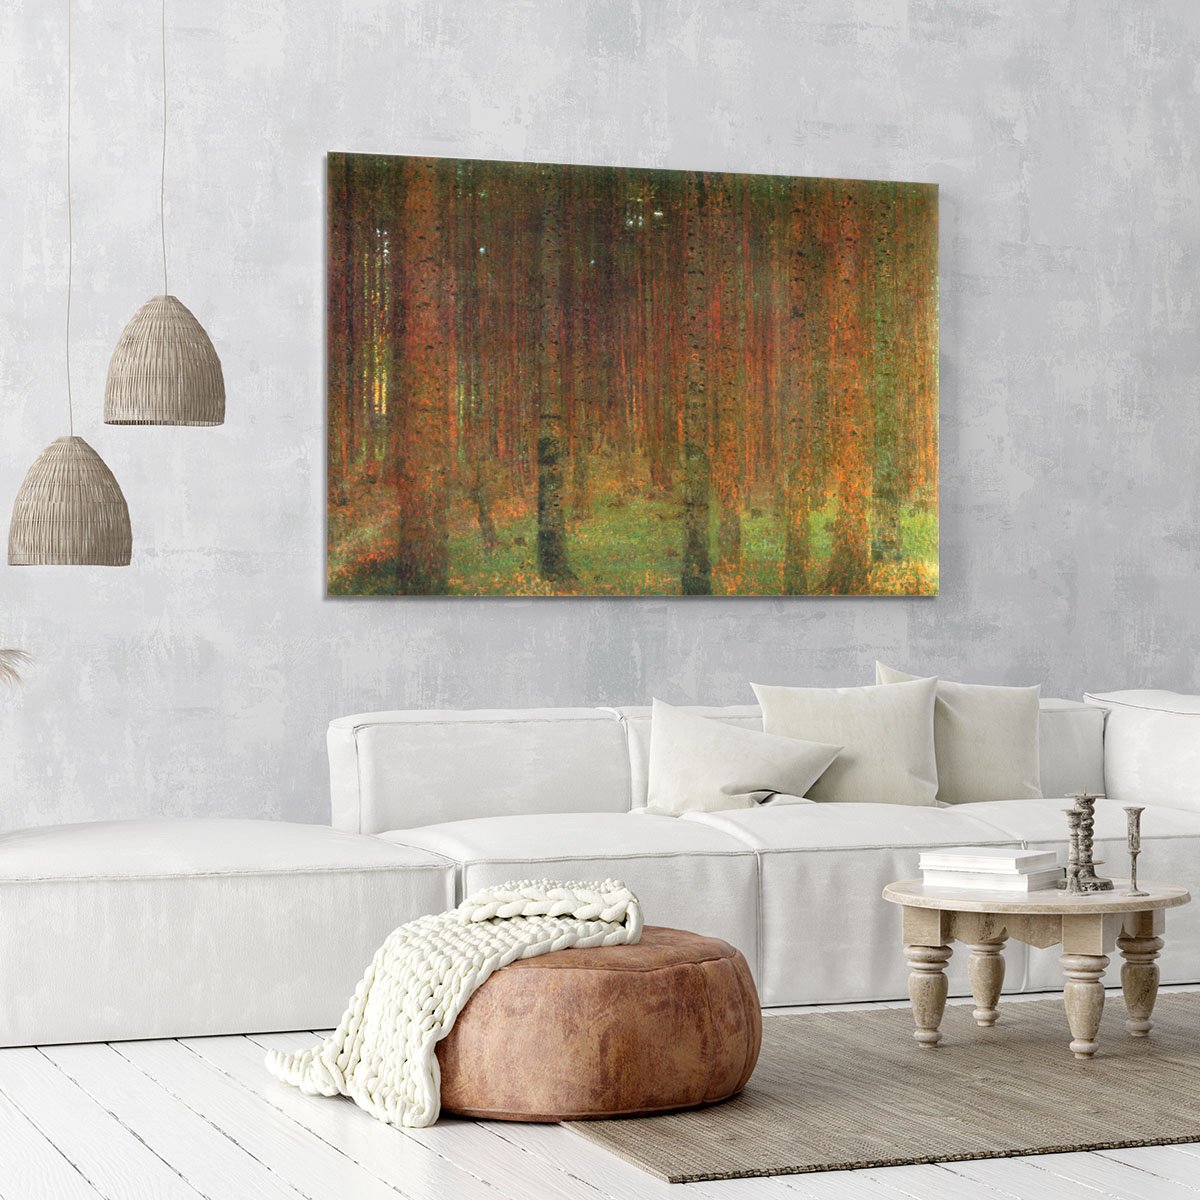 Tannenwald II by Klimt Canvas Print or Poster